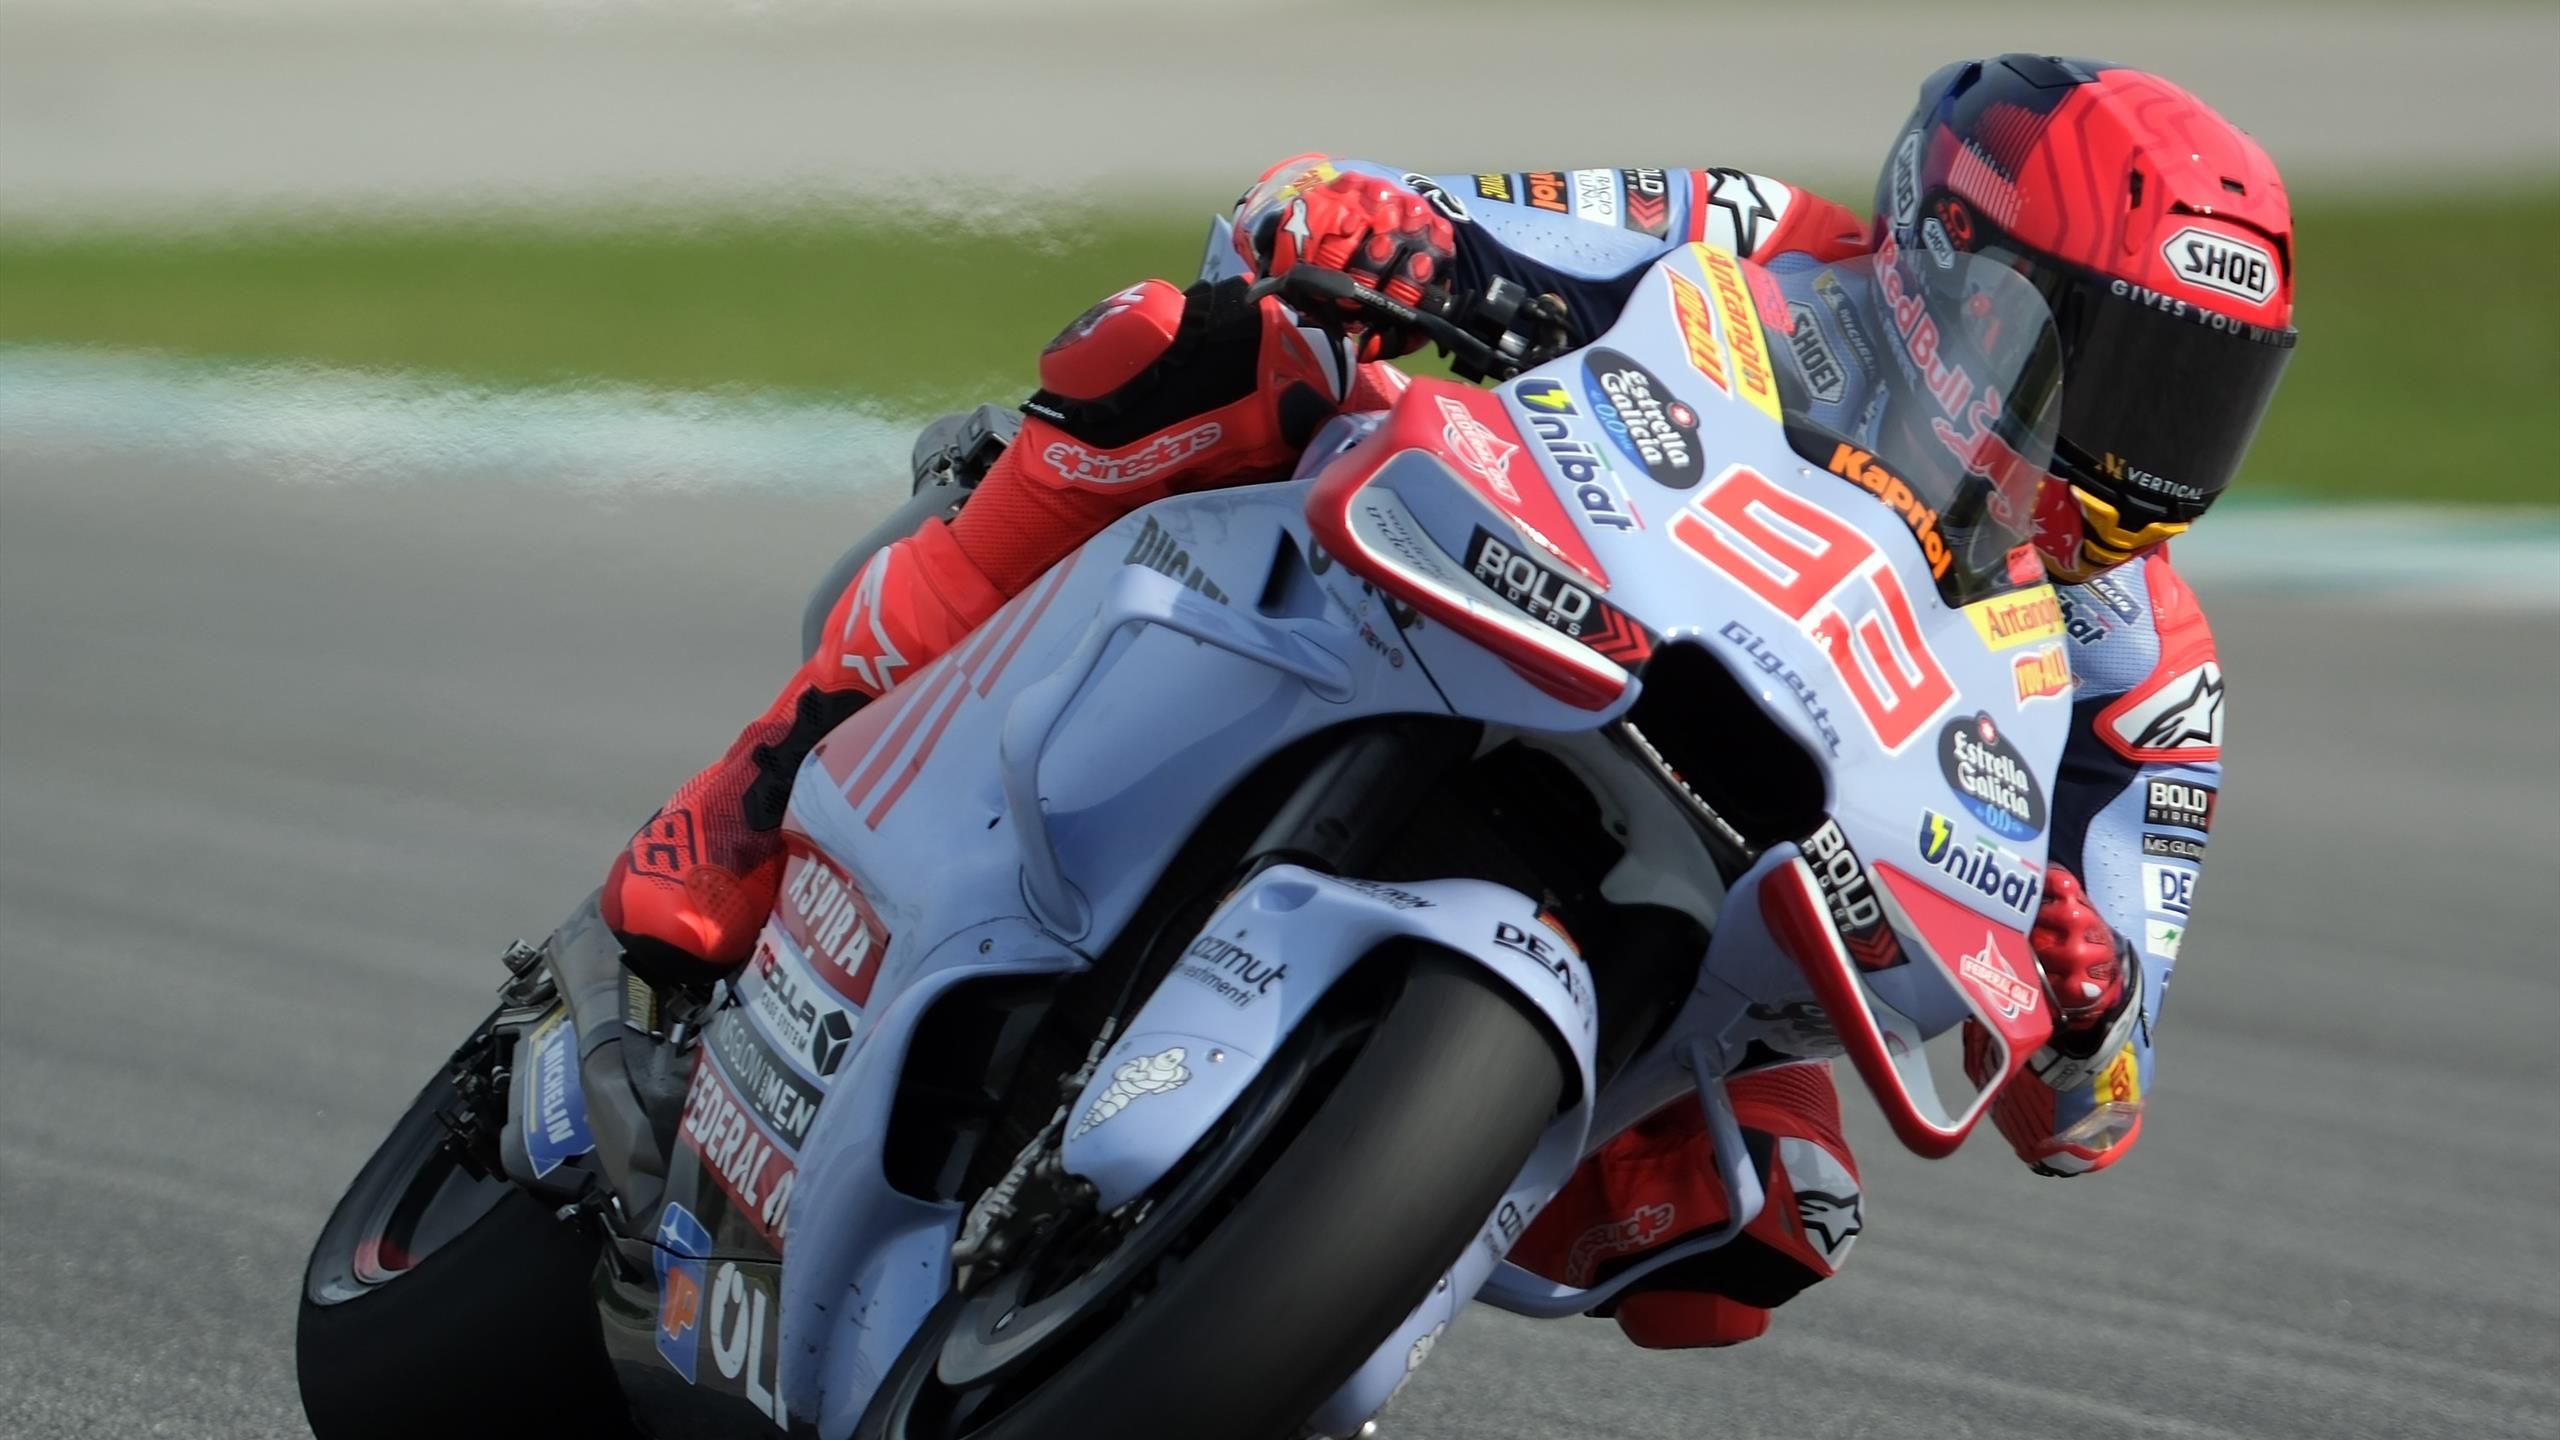 Marc Marquez on why riding the Ducati is 'difficult' compared to Honda ...